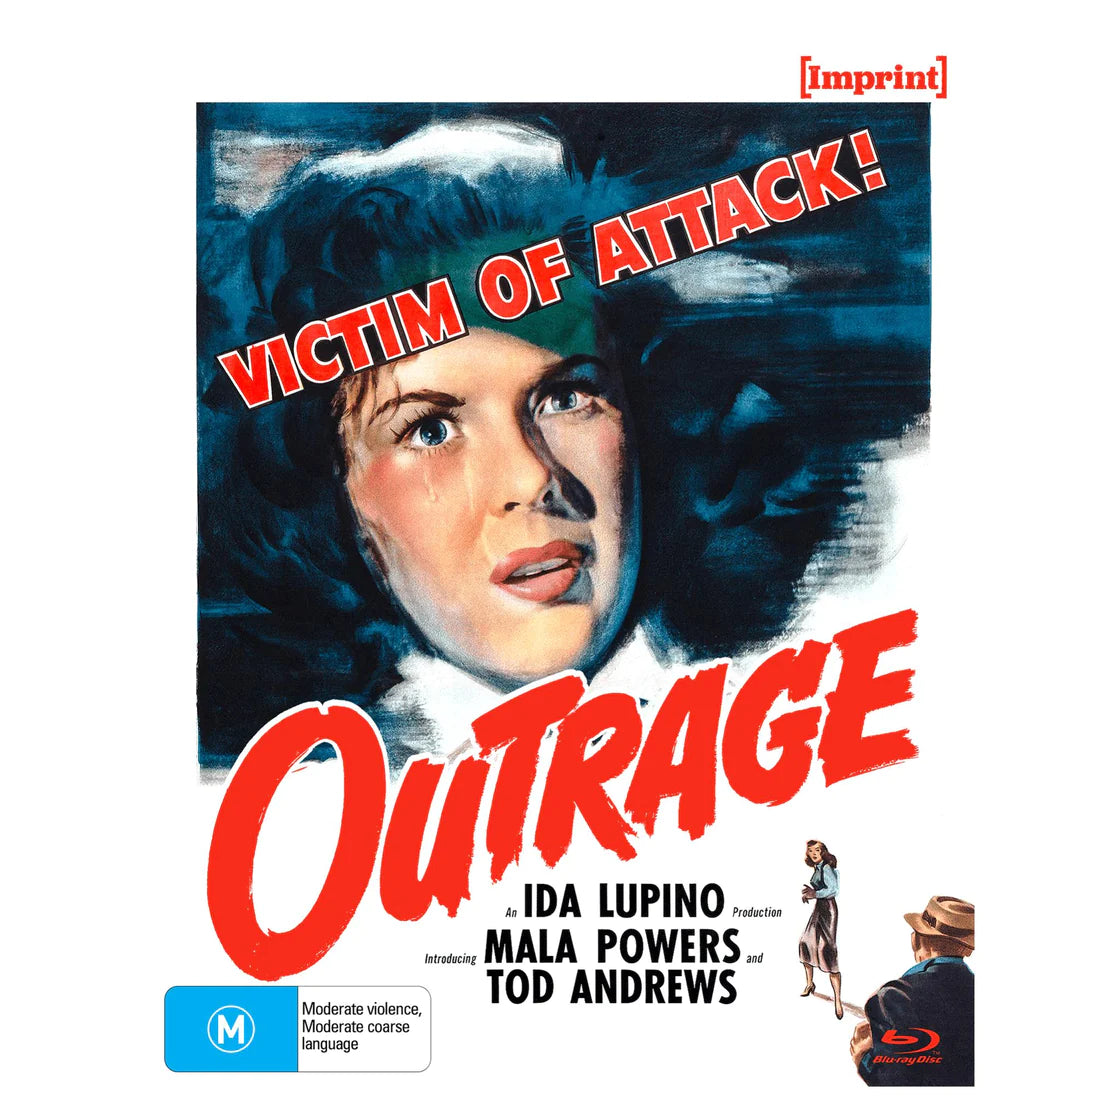 Outrage (Imprint #95 Special Edition) Blu-Ray